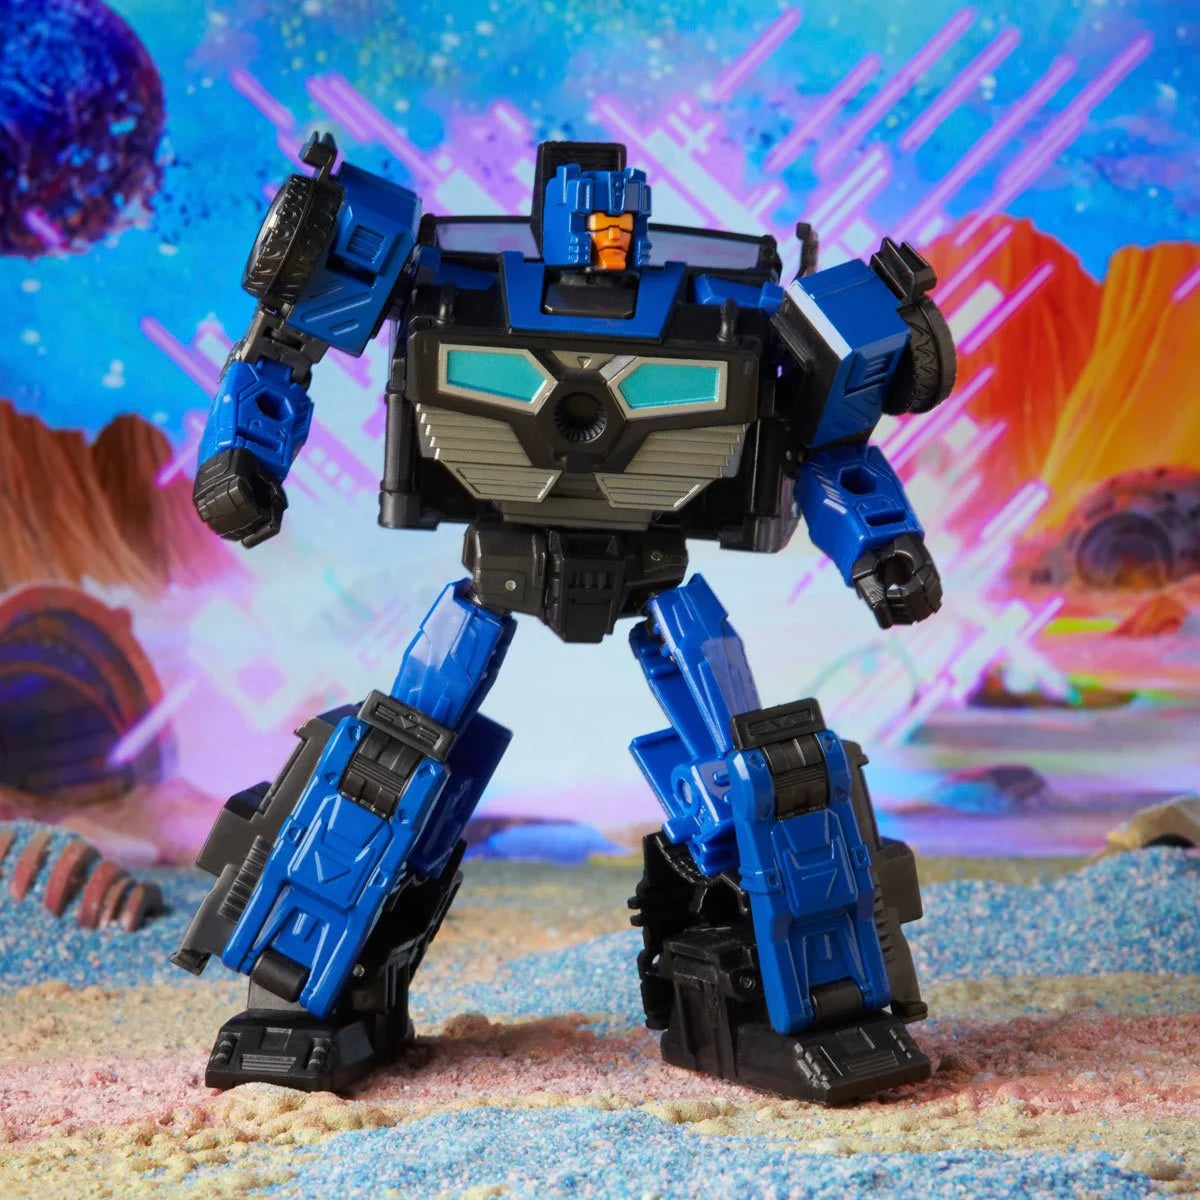 Hasbro Soundwave Deluxe Class: TRANSFORMERS PRIME ROBOTS IN DISGUISE